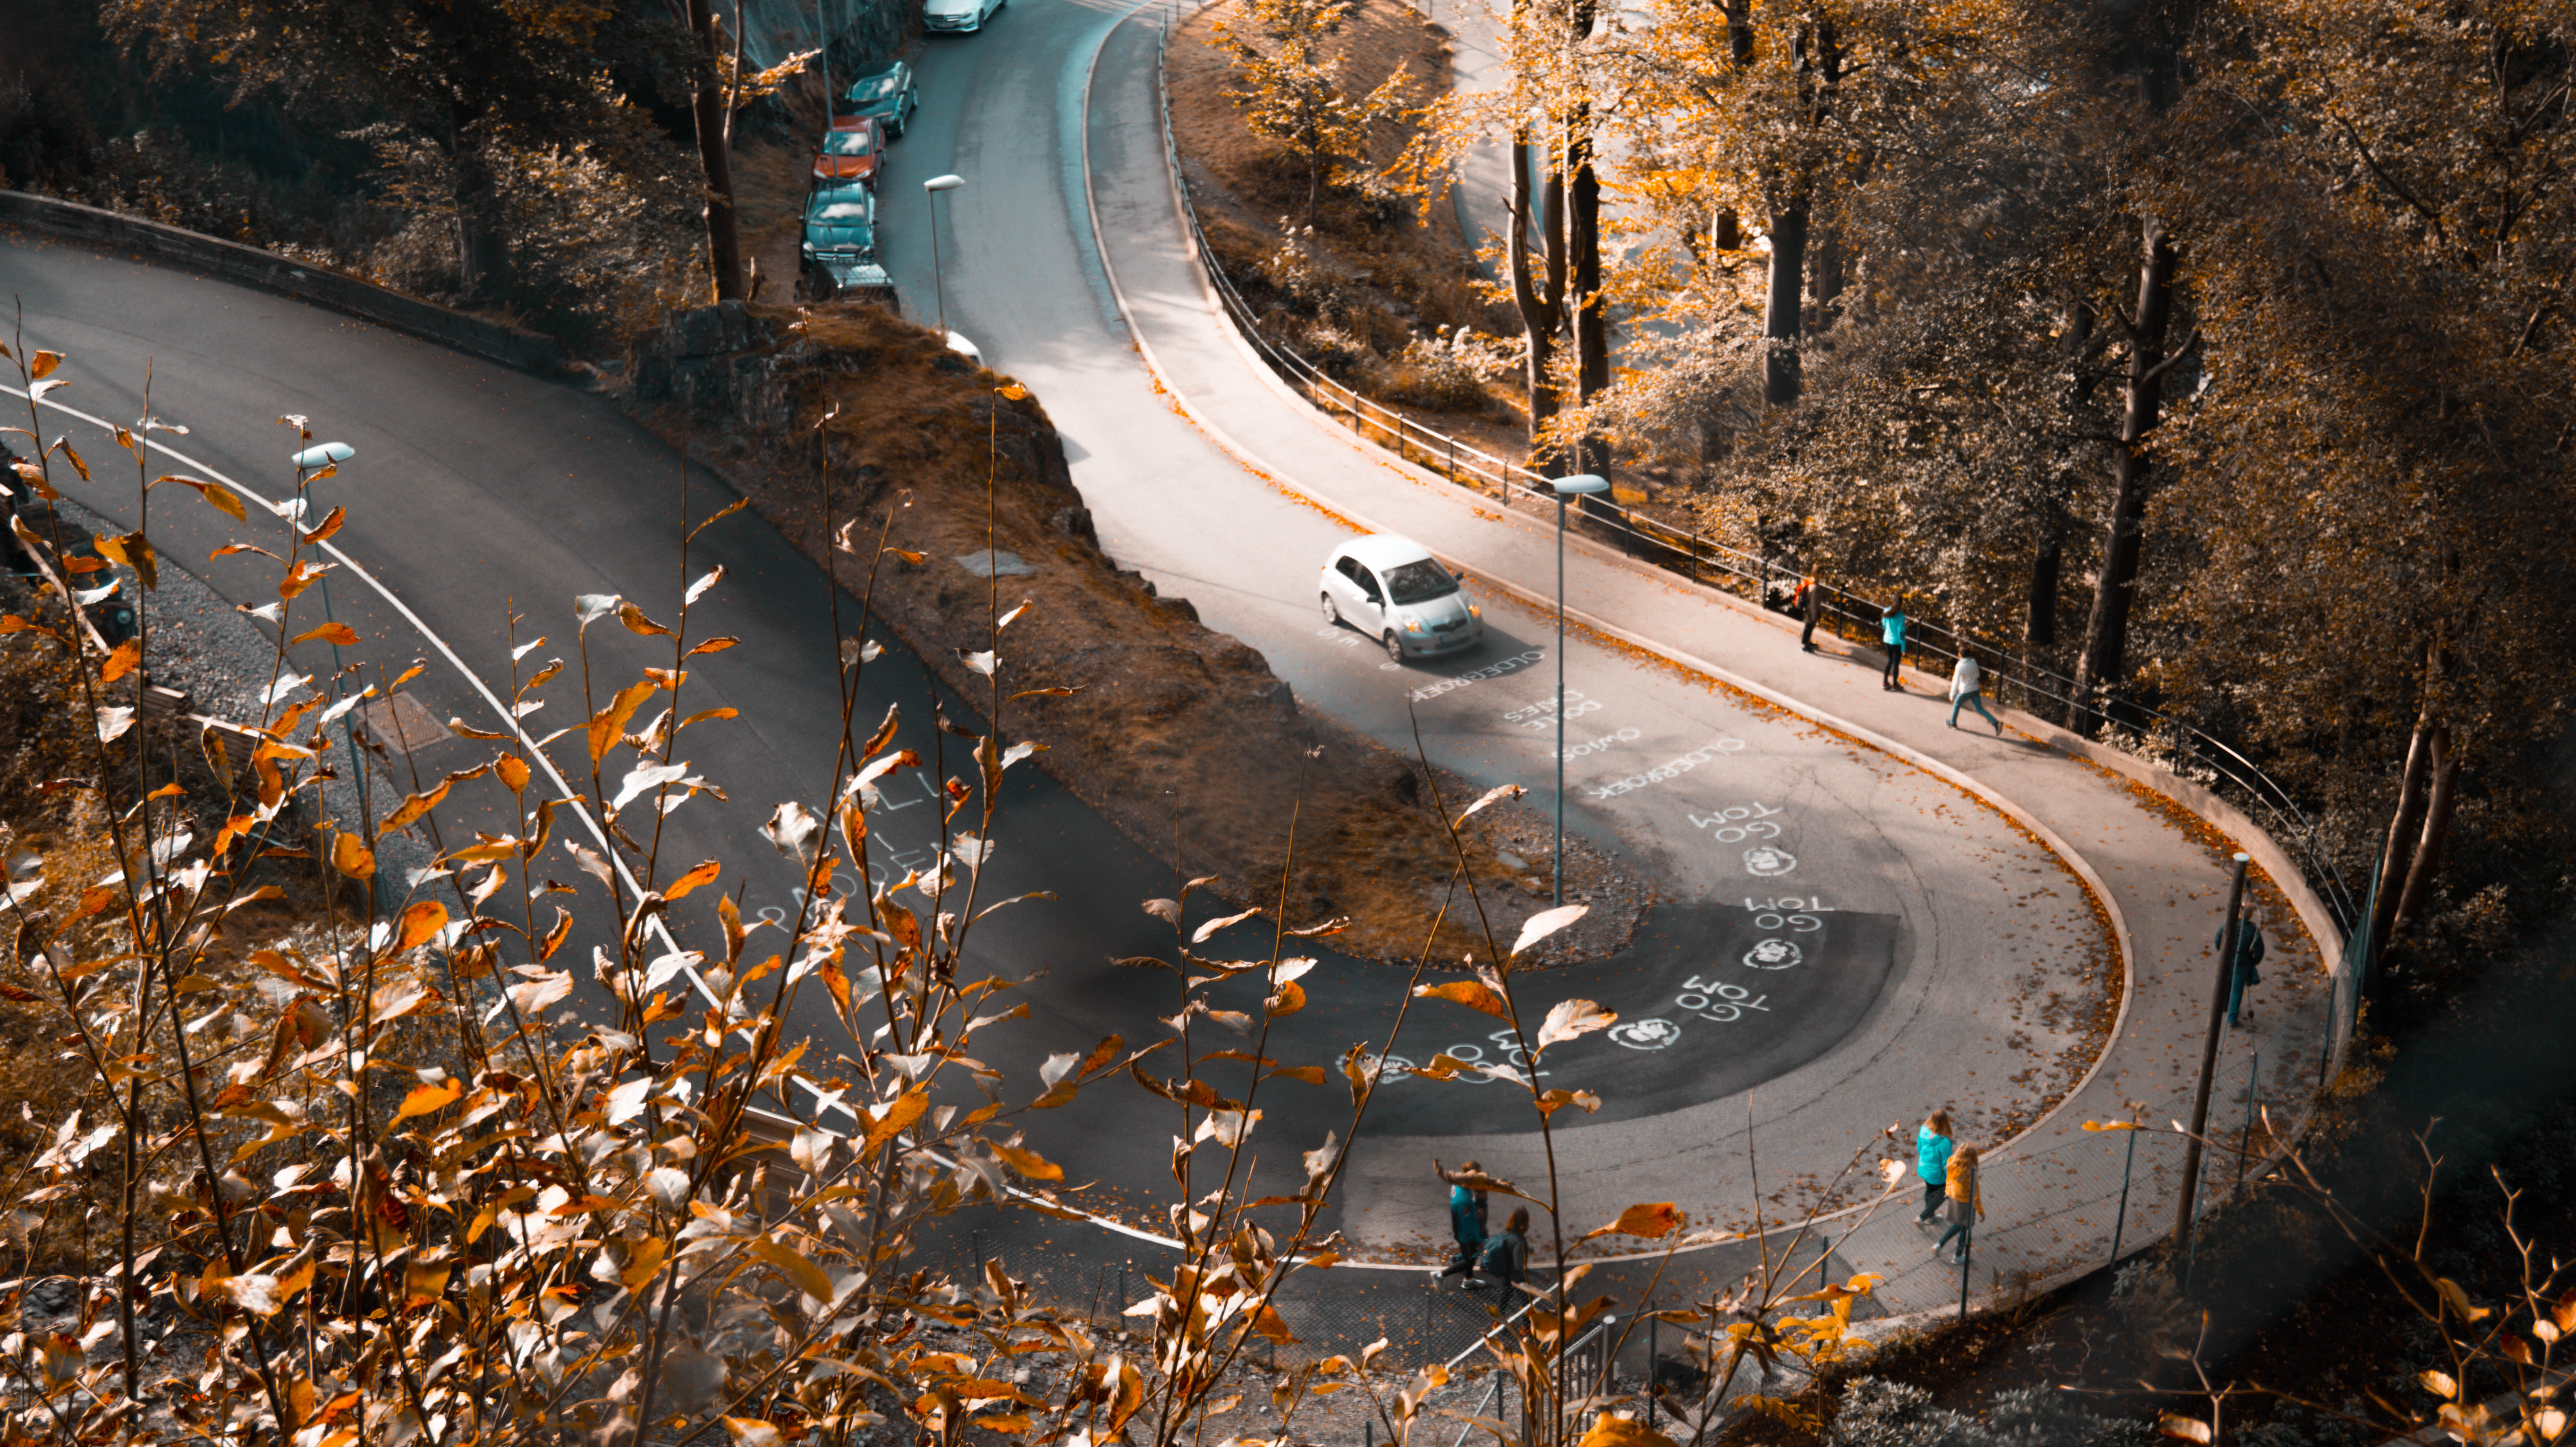 Autumn Road Orange Leaves Fallen Cars Peoples Walking 5k, HD Artist, 4k Wallpaper, Image, Background, Photo and Picture